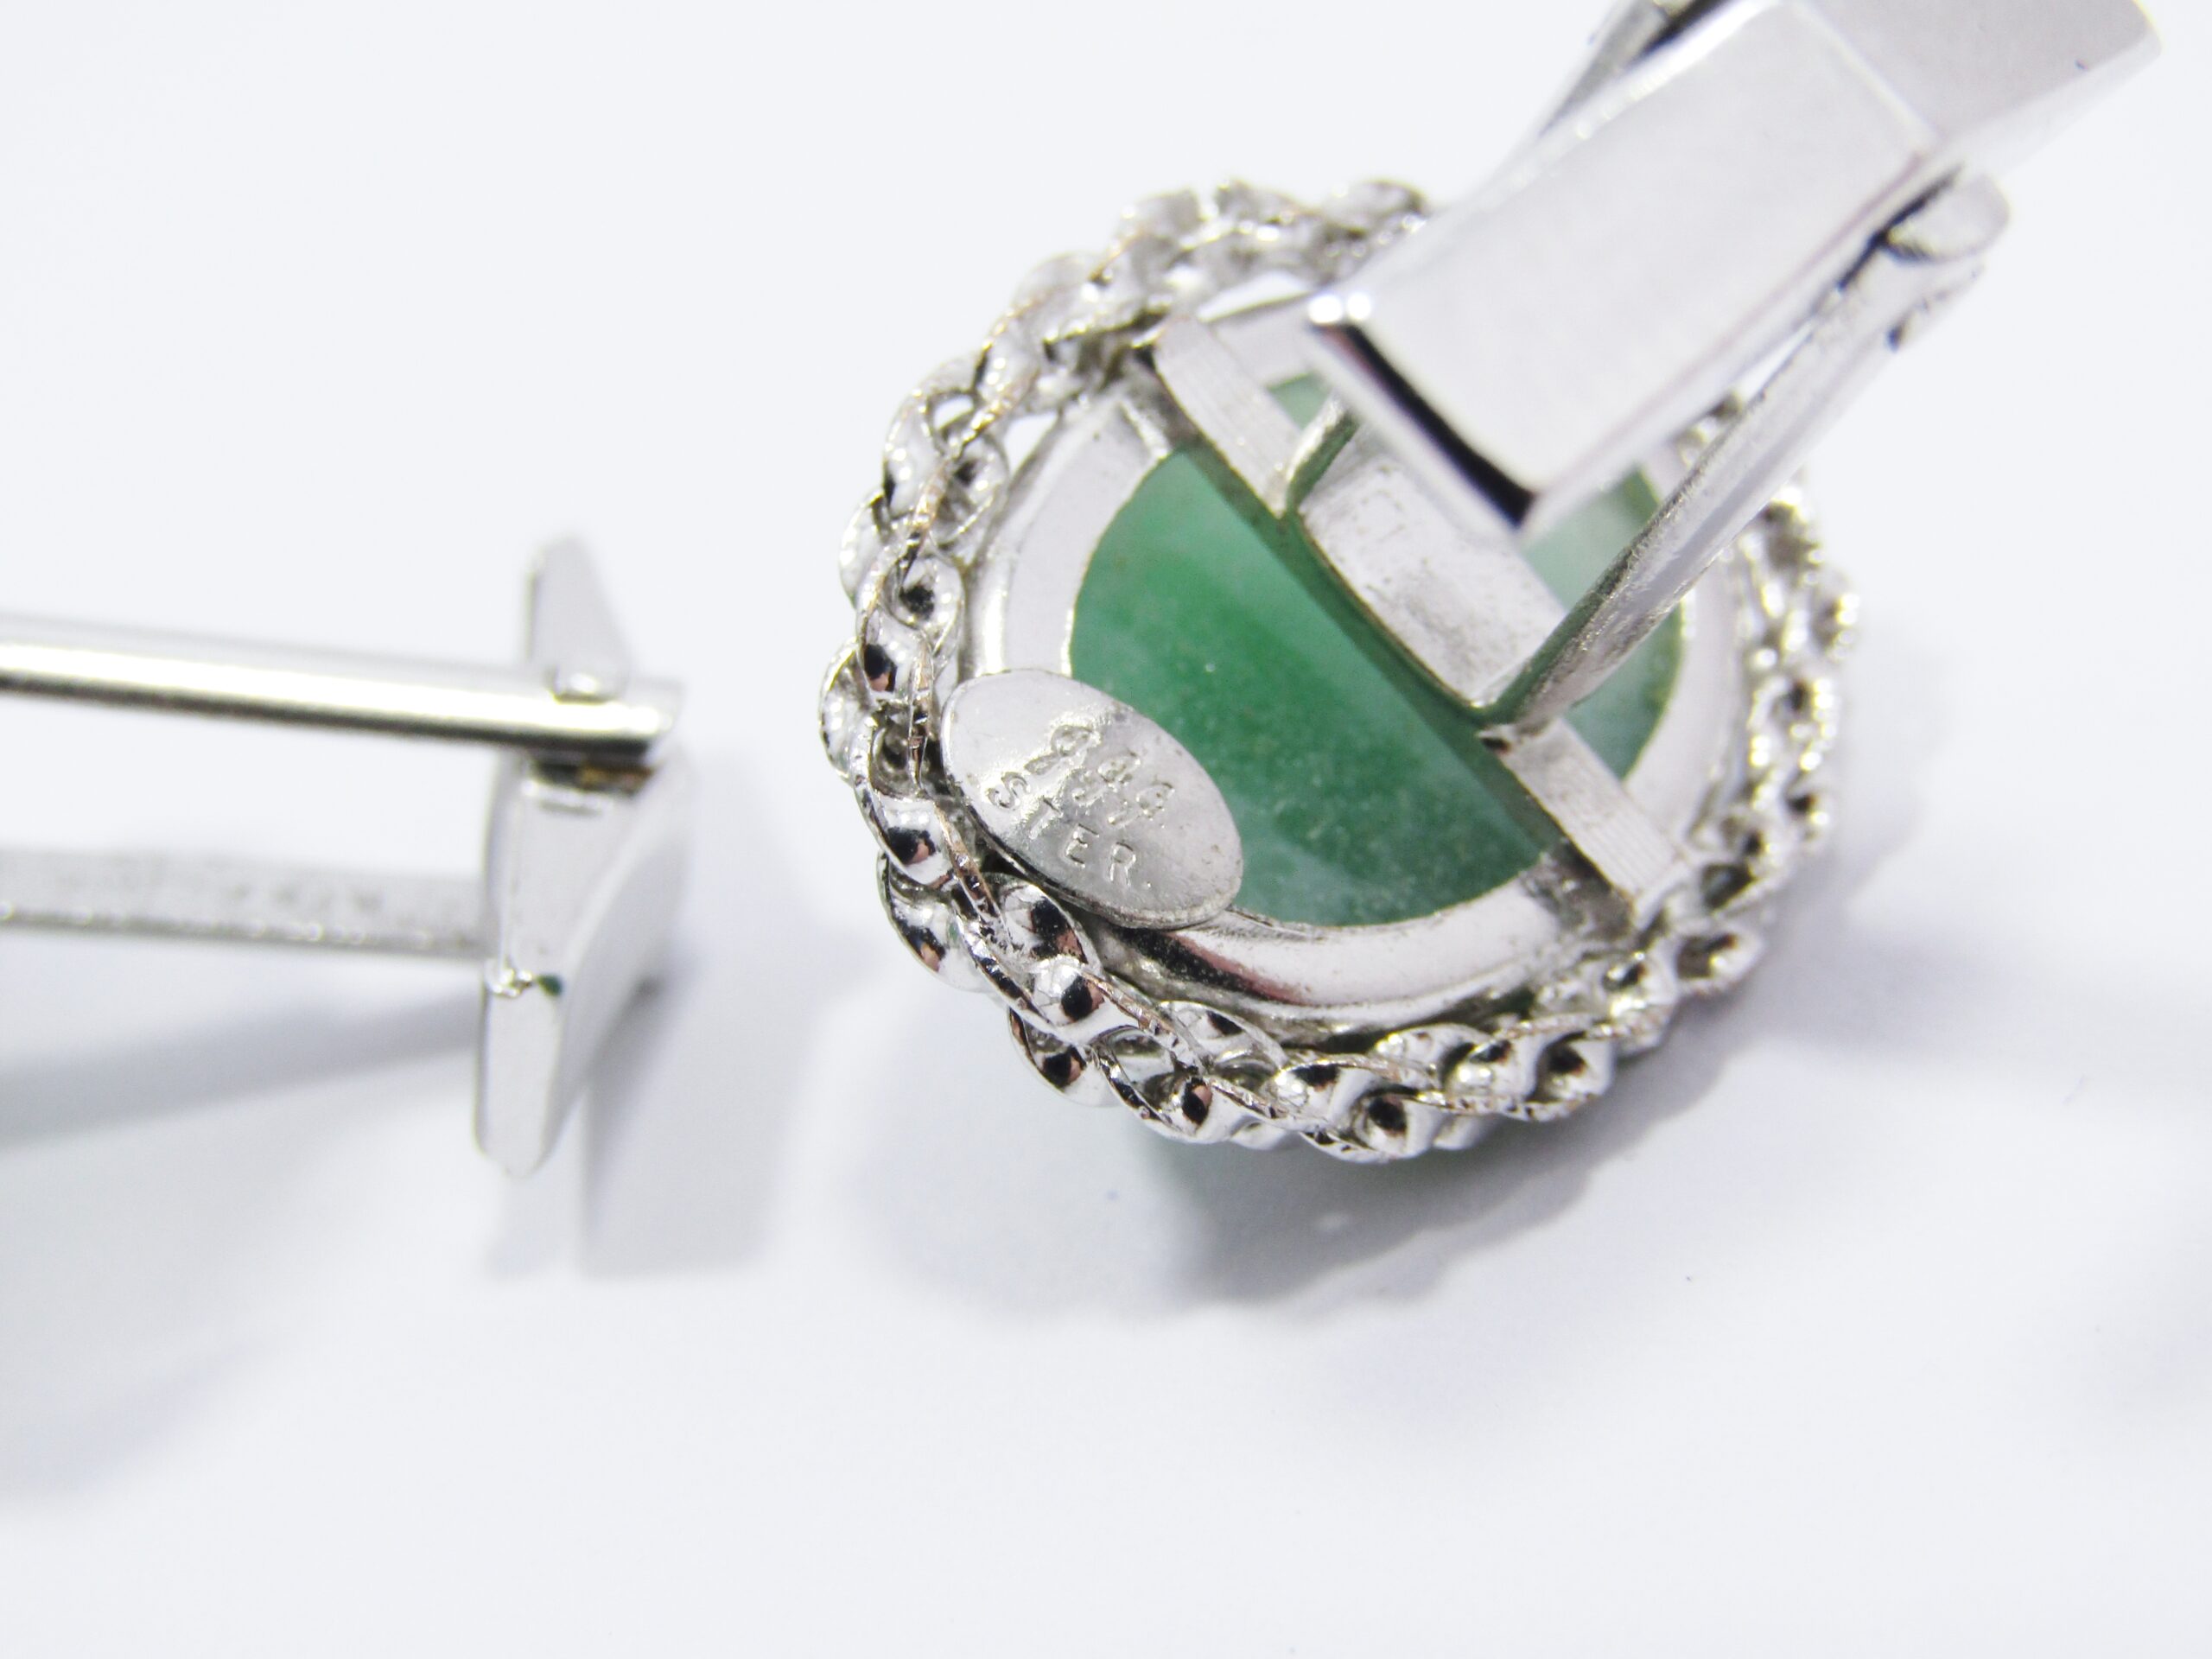 A Stunning Pair of Vintage Green Stone Cuff Links in Sterling Silve